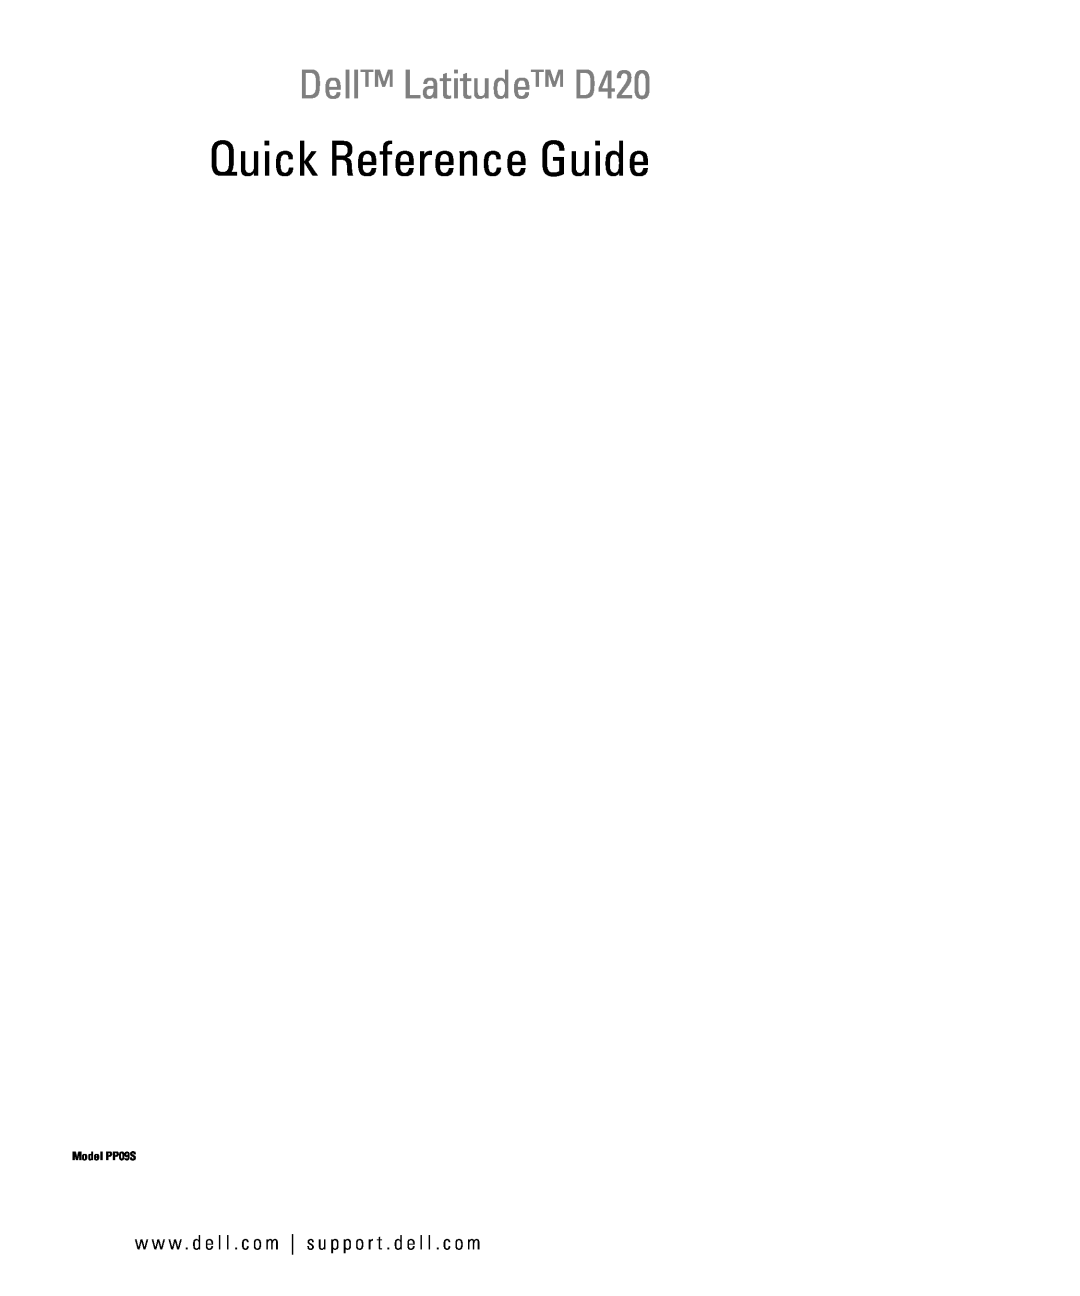 Dell manual Quick Reference Guide, Dell Latitude D420, w w w . d e l l . c o m s u p p o r t . d e l l . c o m 